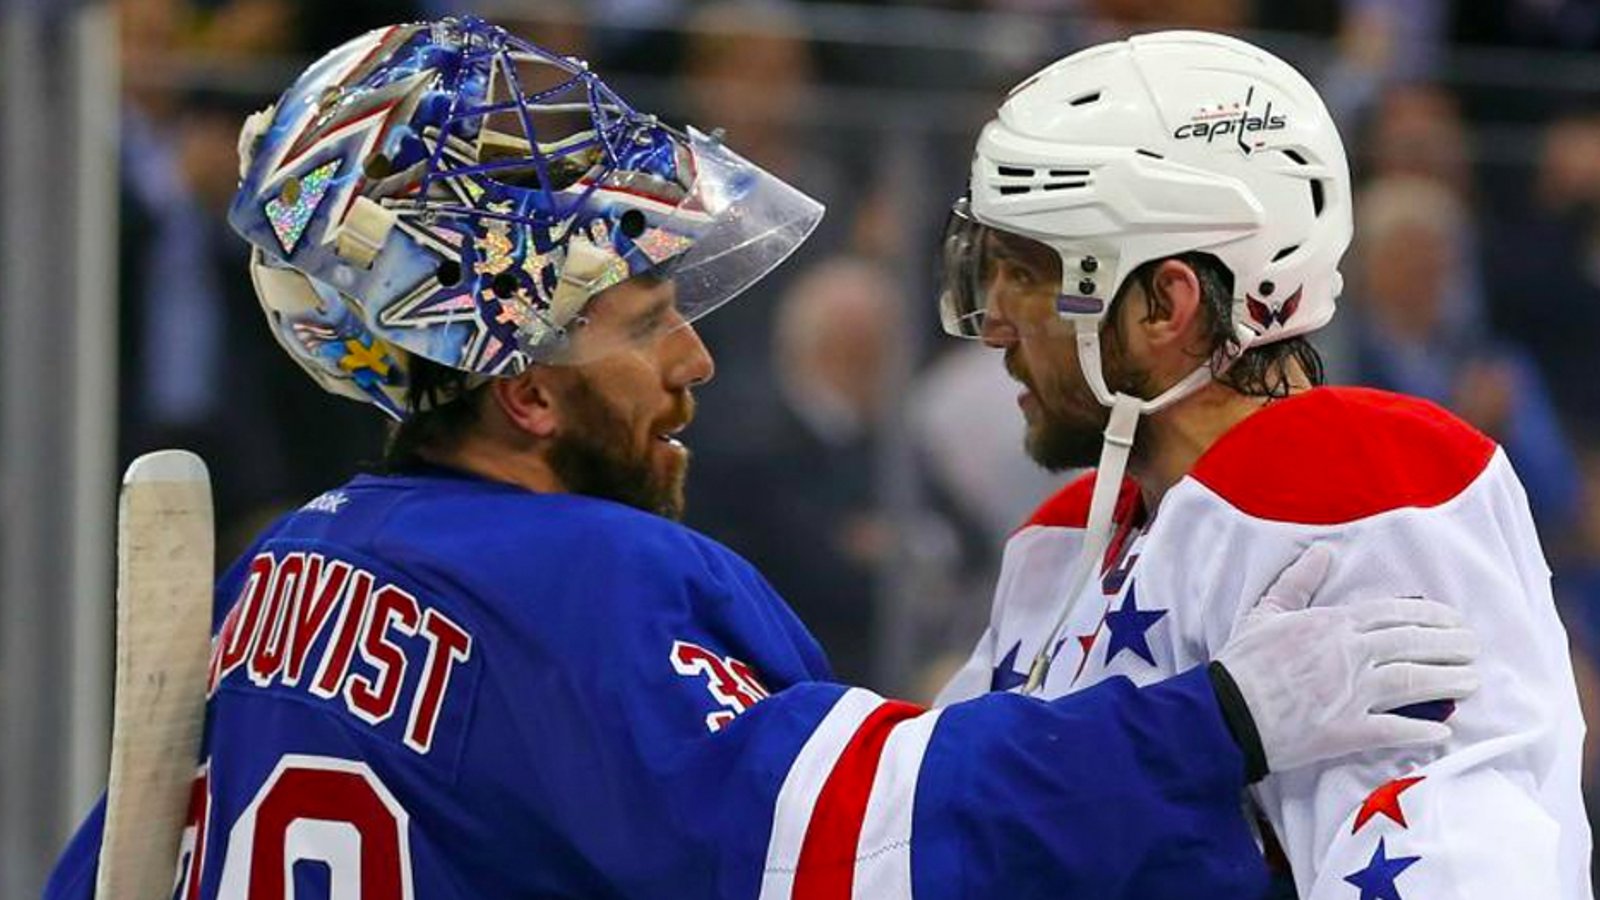 Ovechkin reacts to Lundqvist's news that he won't be joining the Capitals in 2021